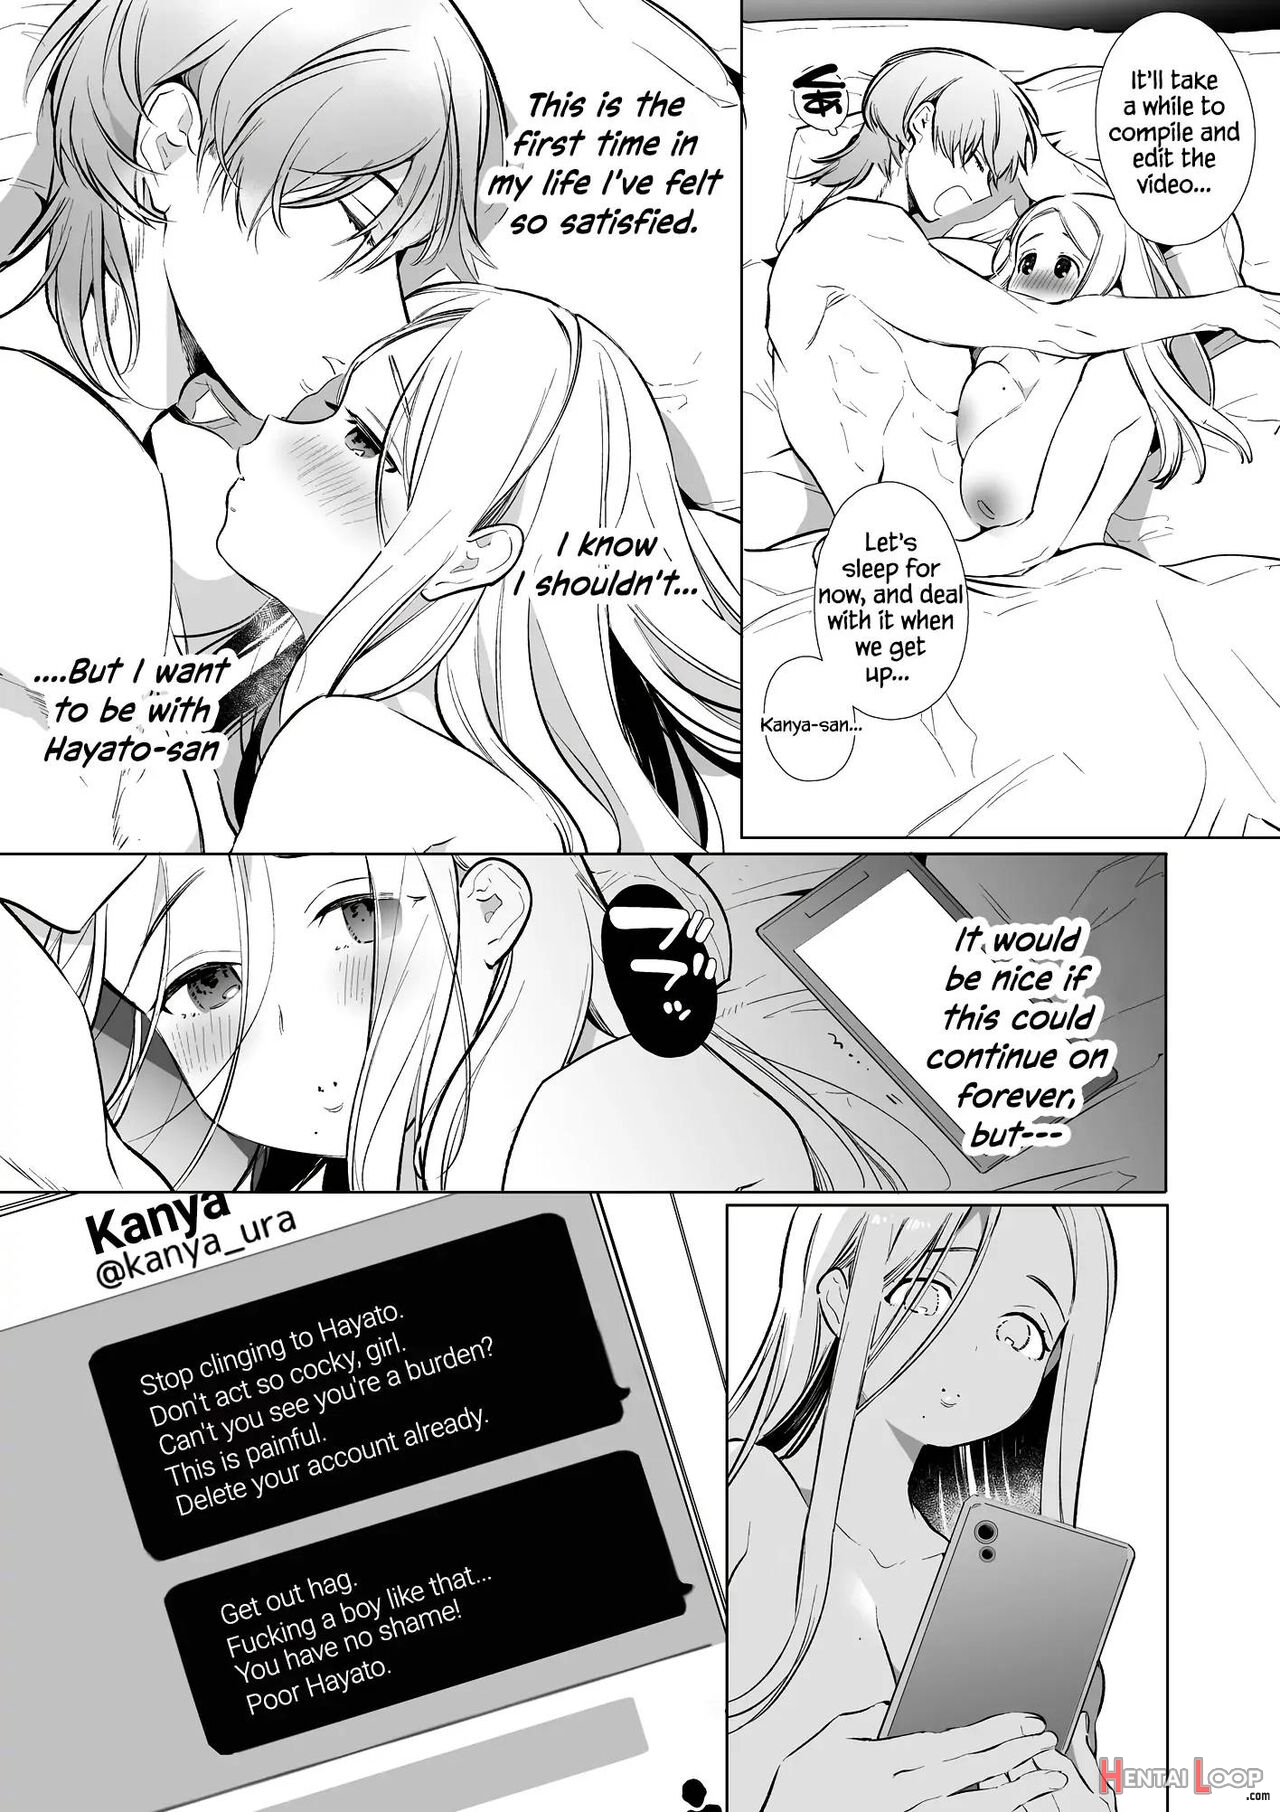 Kana-san Ntr ~ Degradation Of A Housewife By A Guy In An Alter Account ~ page 46